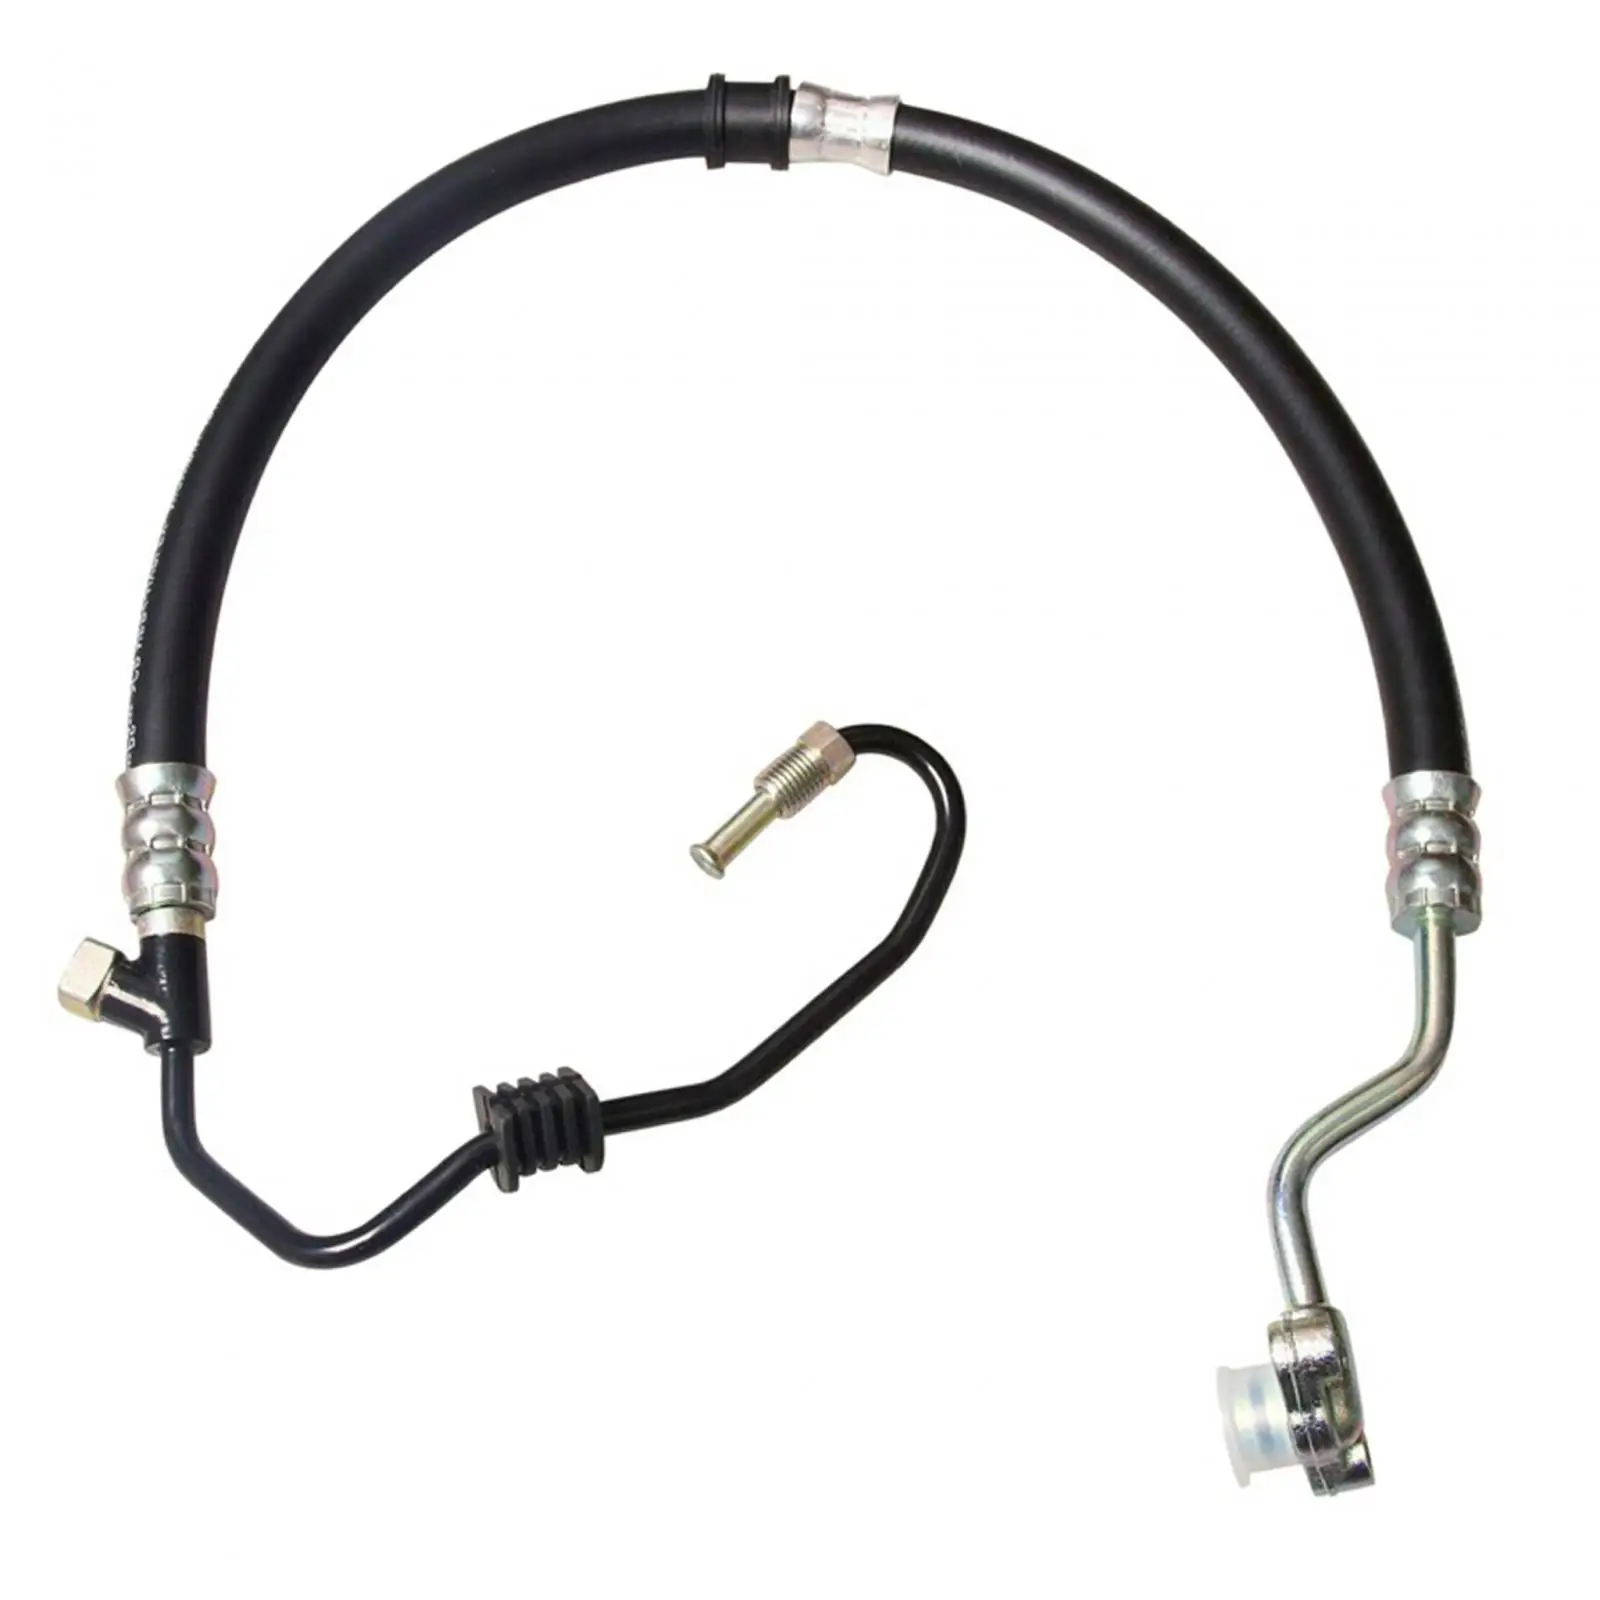 Power Steering Pressure Hose 53713-s84-a04 for Honda Accord 1998-2002